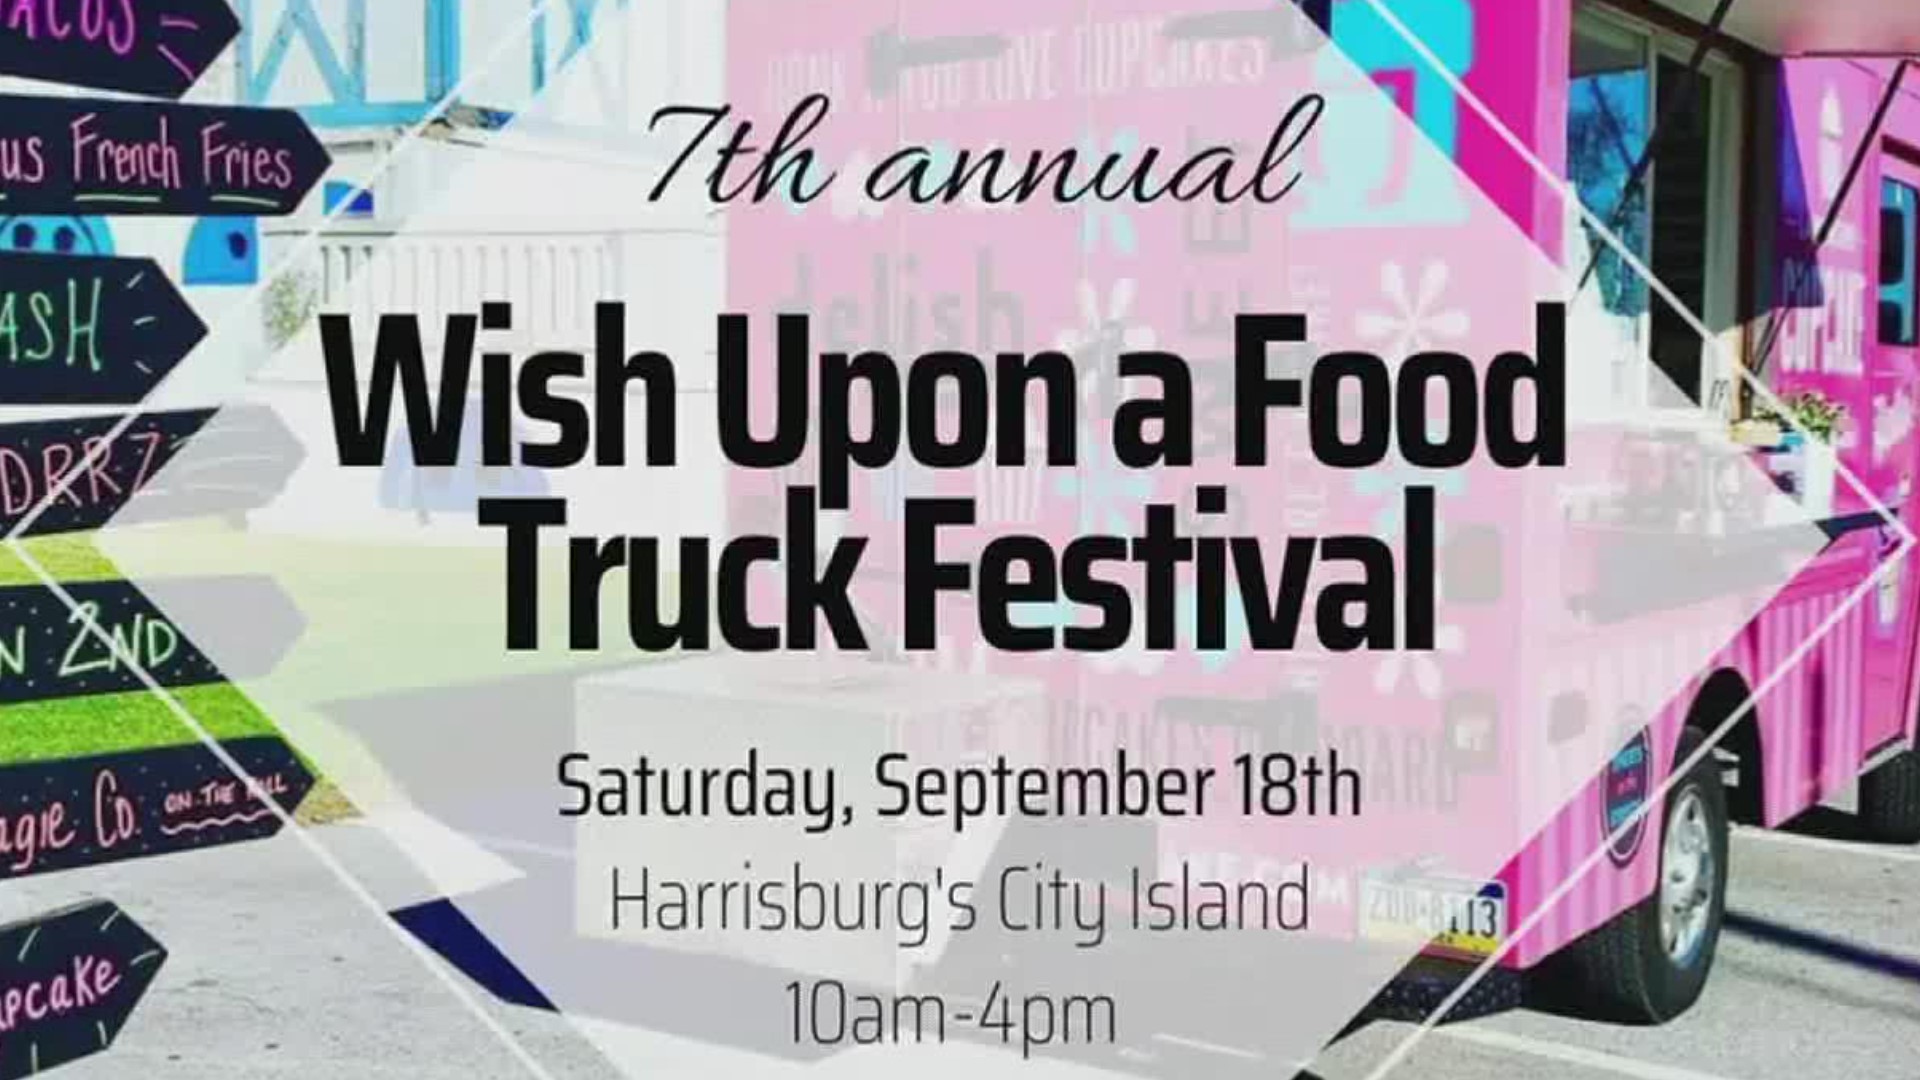 The festival is 10 a.m. to 4 p.m. on Saturday Sept. 18.